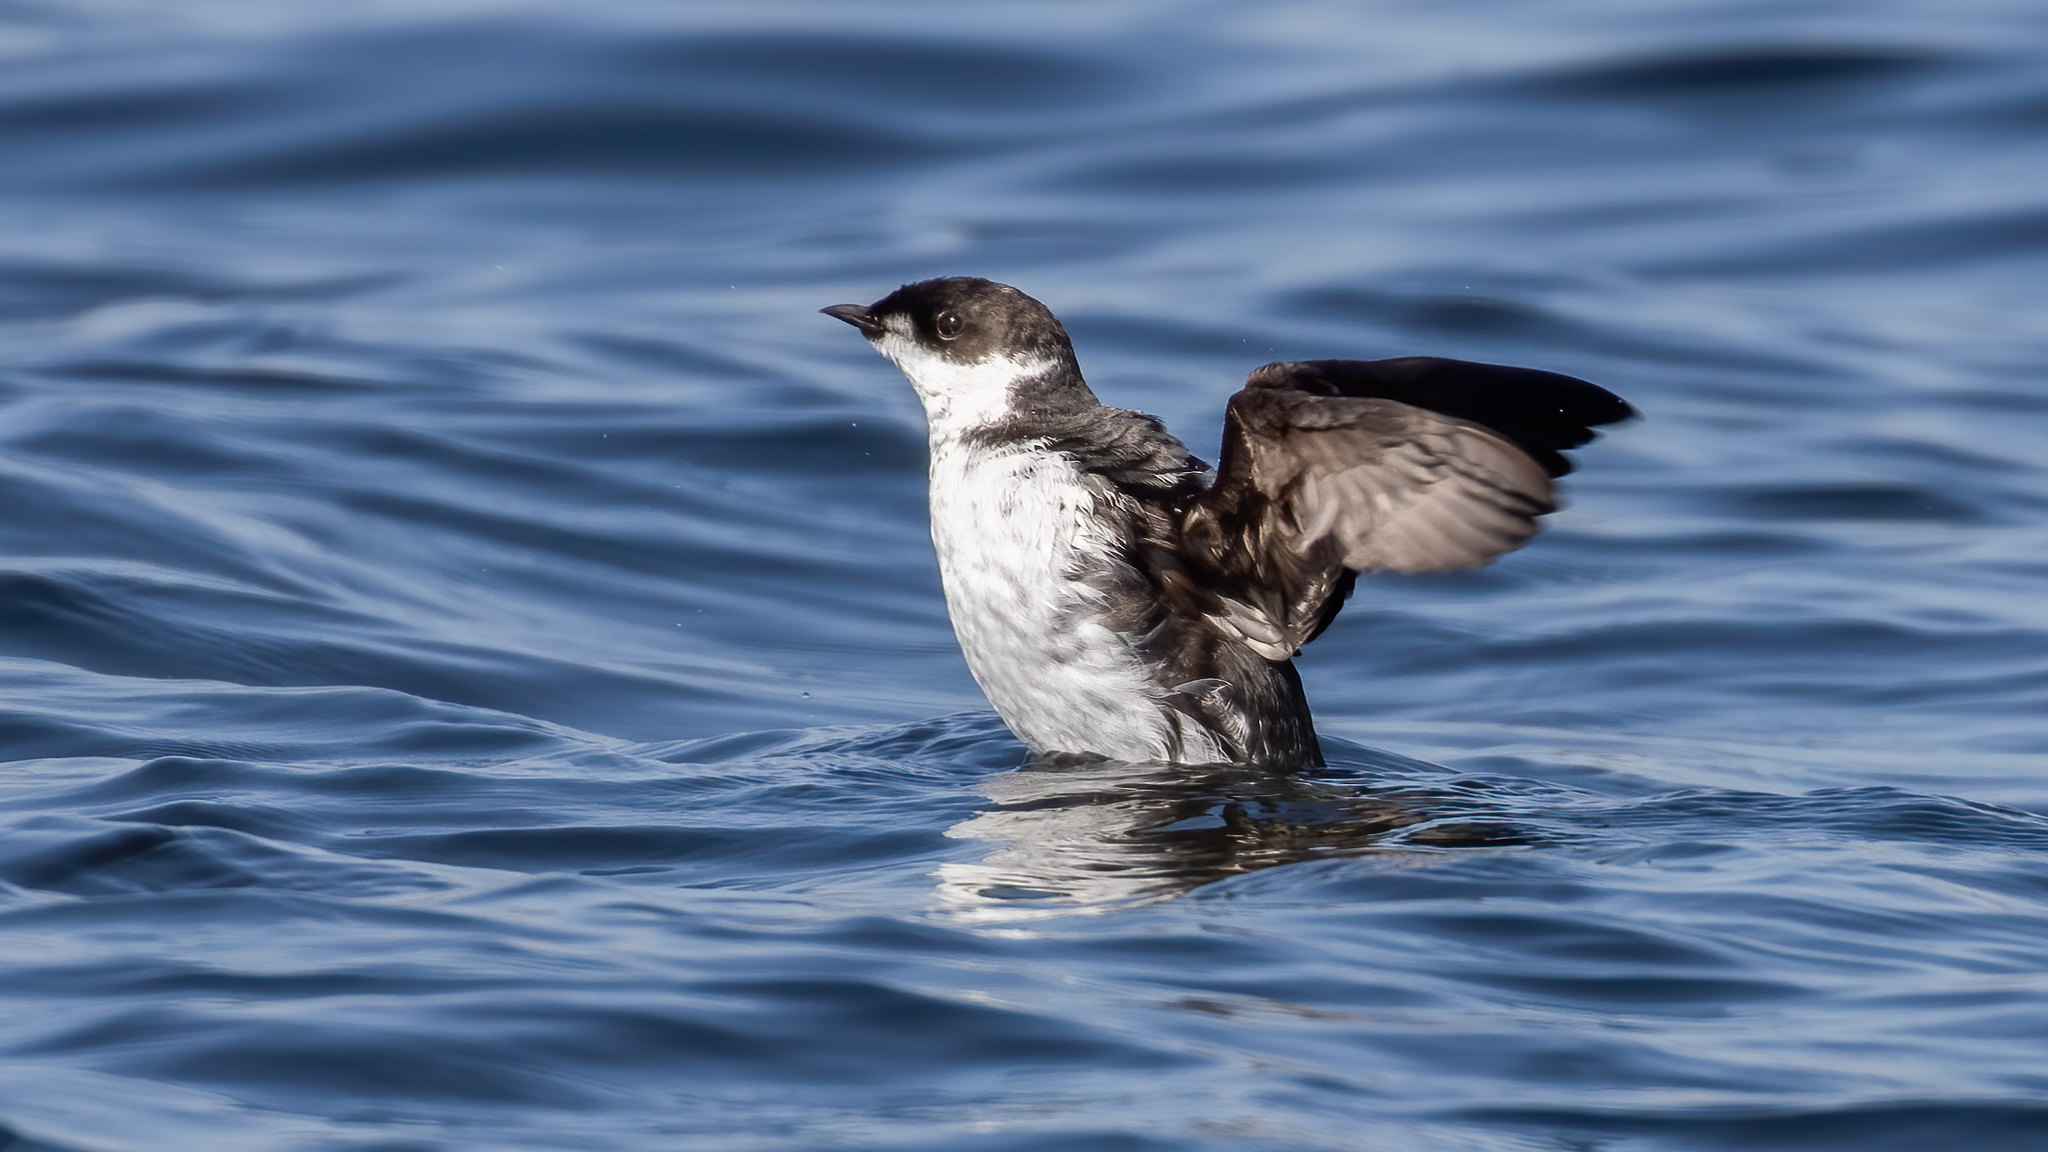 small seabird with wings outstretched on the ocean surface